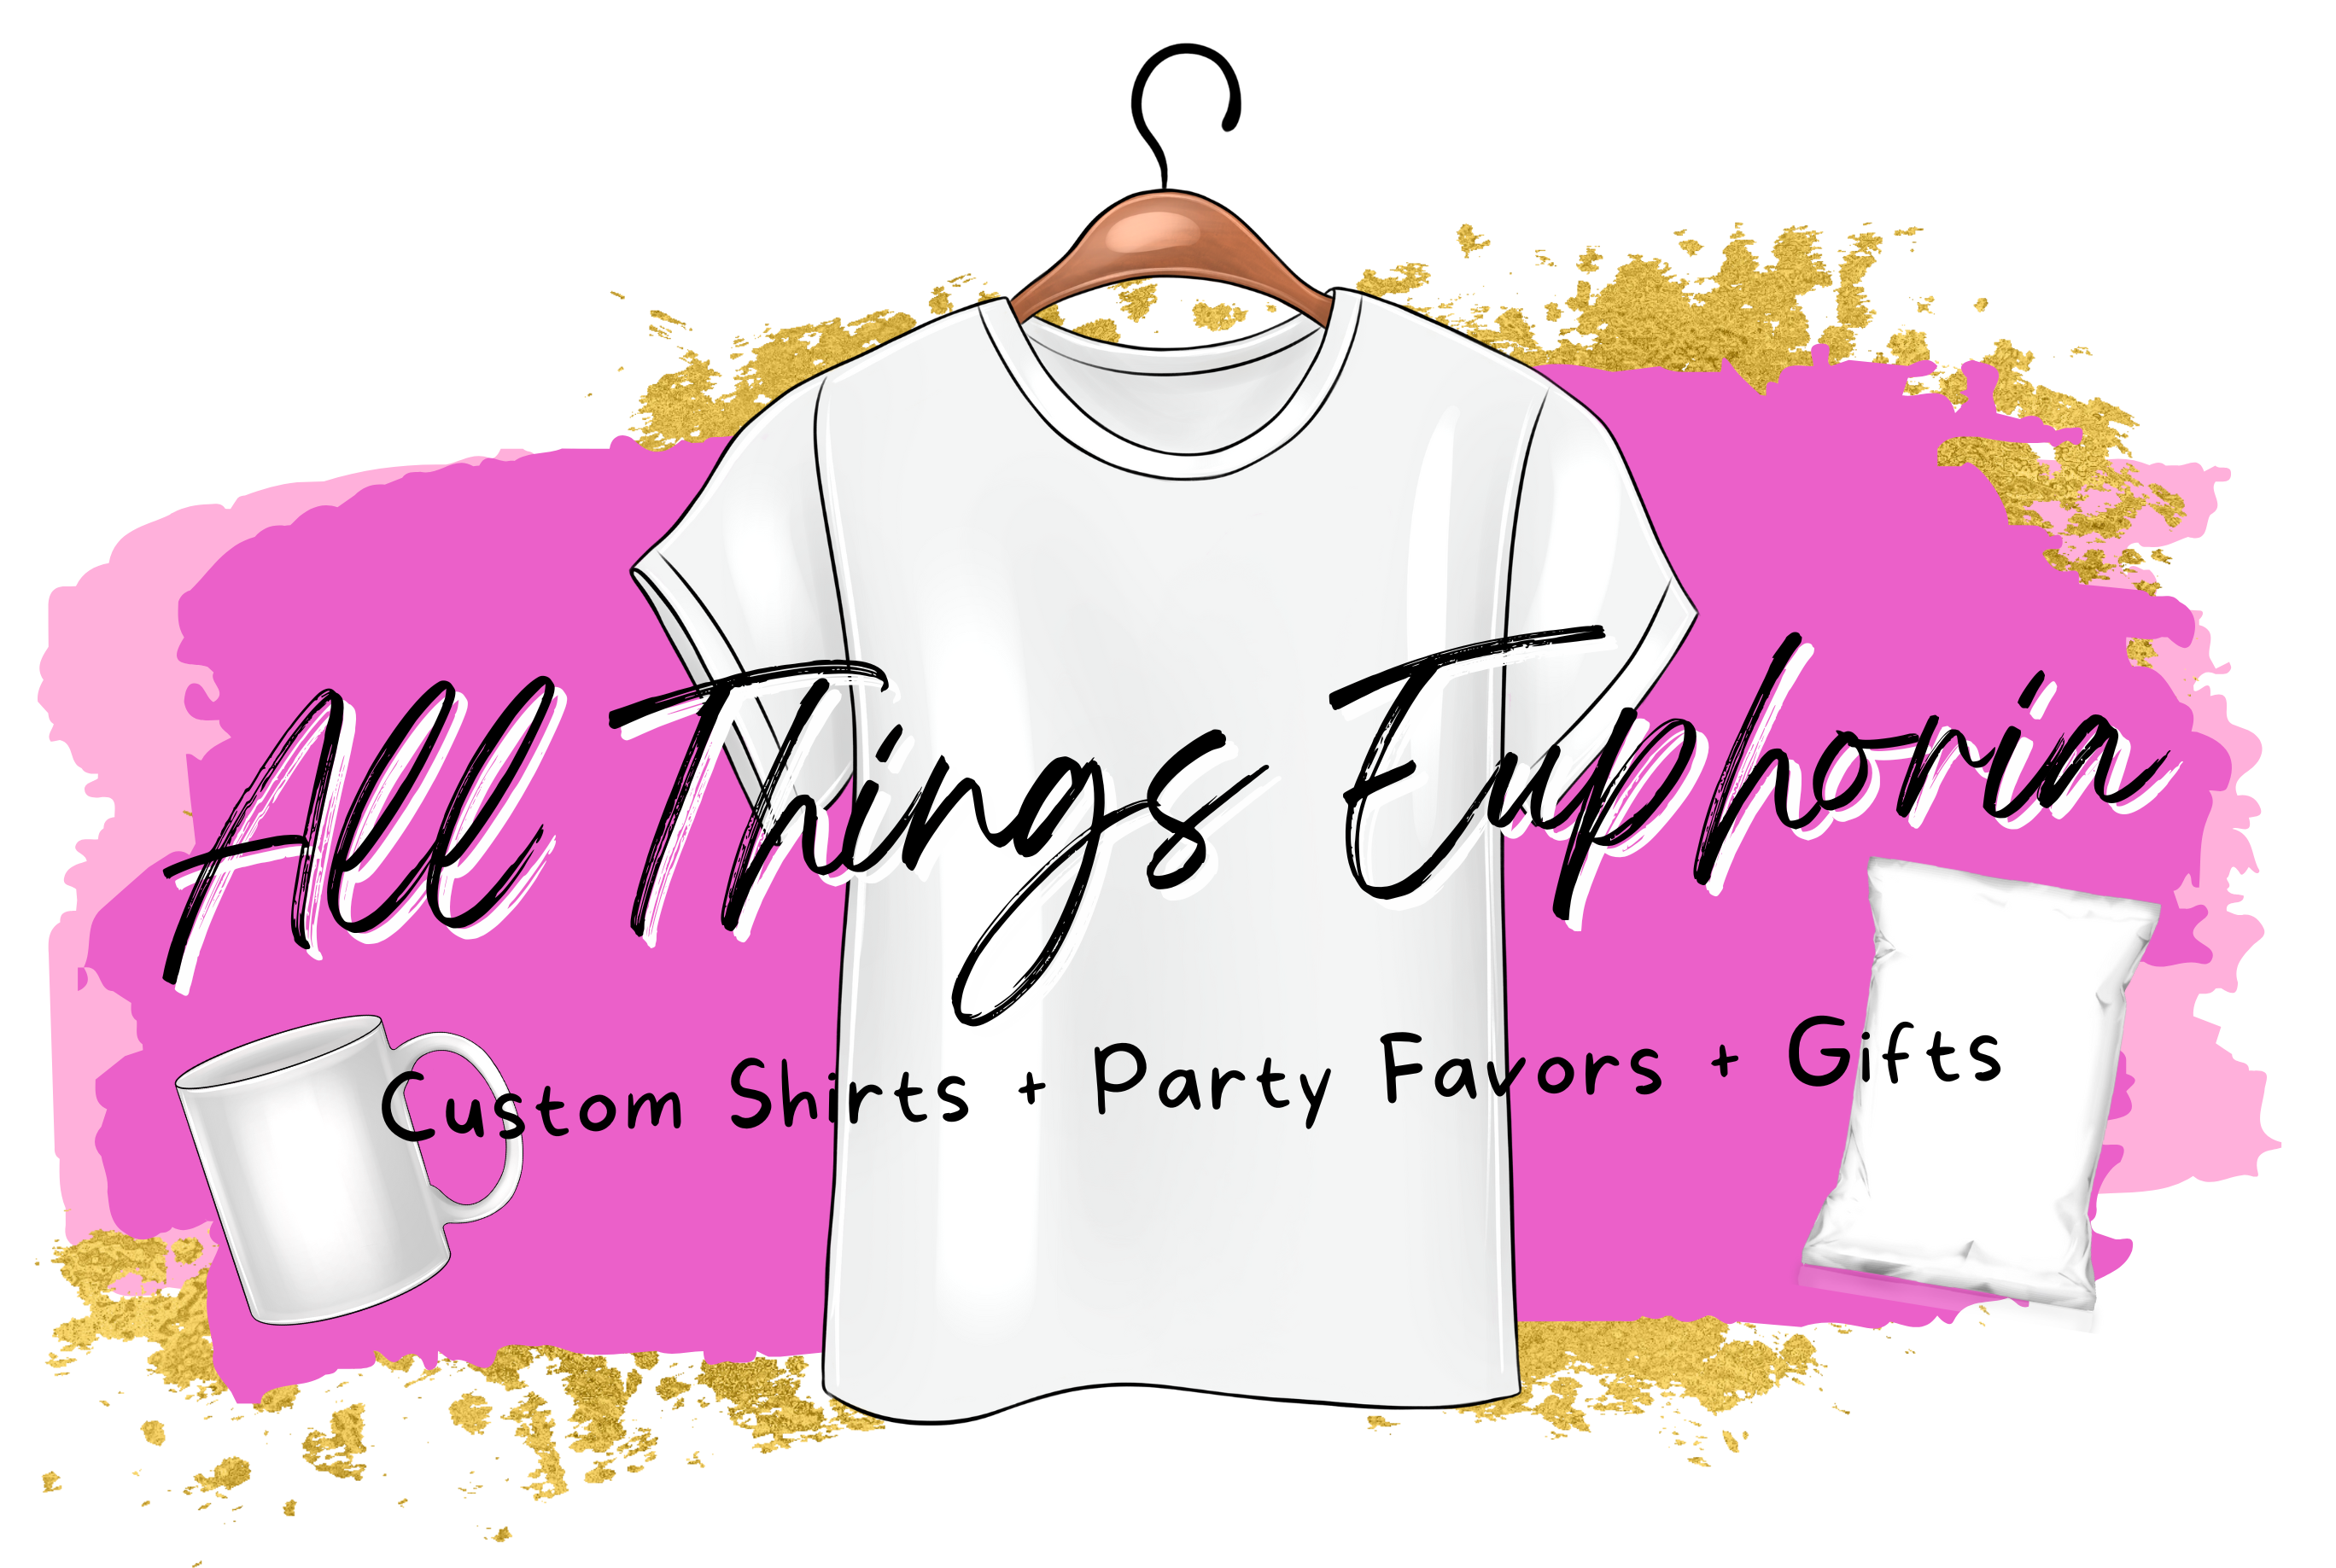 Buy Custom T-Shirts, Party Favors & Gifts